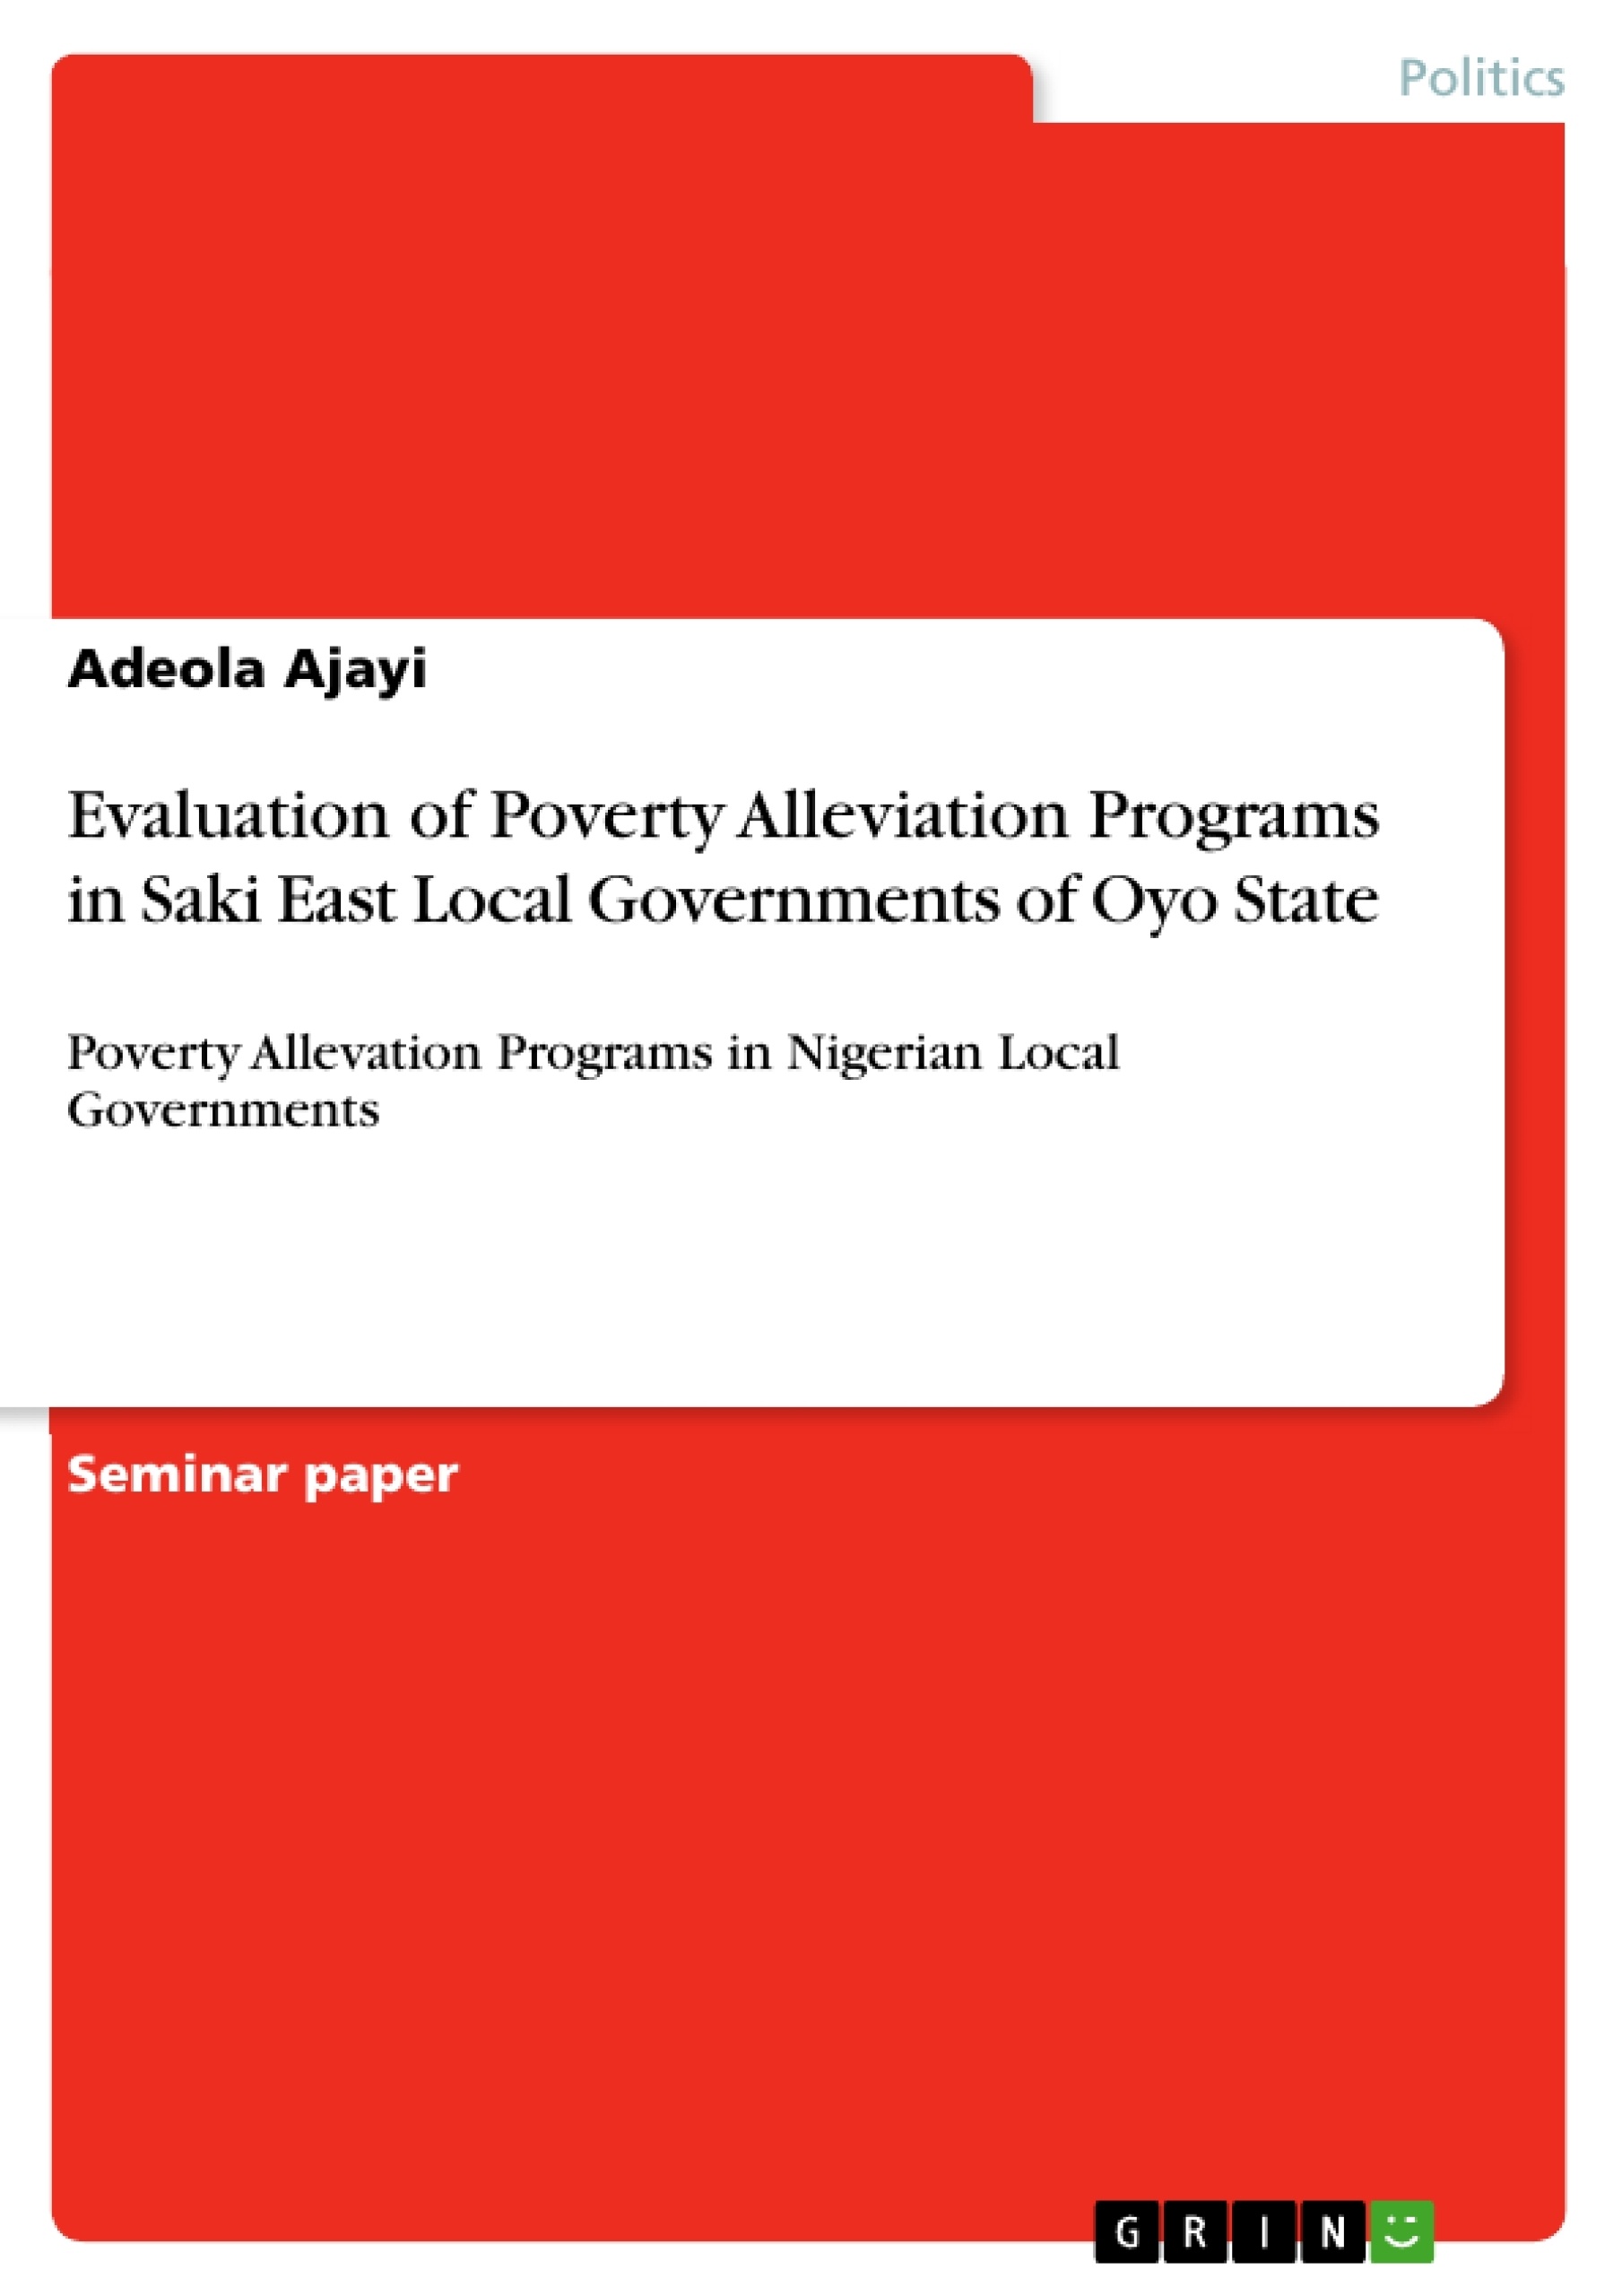 Title: Evaluation of Poverty Alleviation Programs in Saki East Local Governments of Oyo State